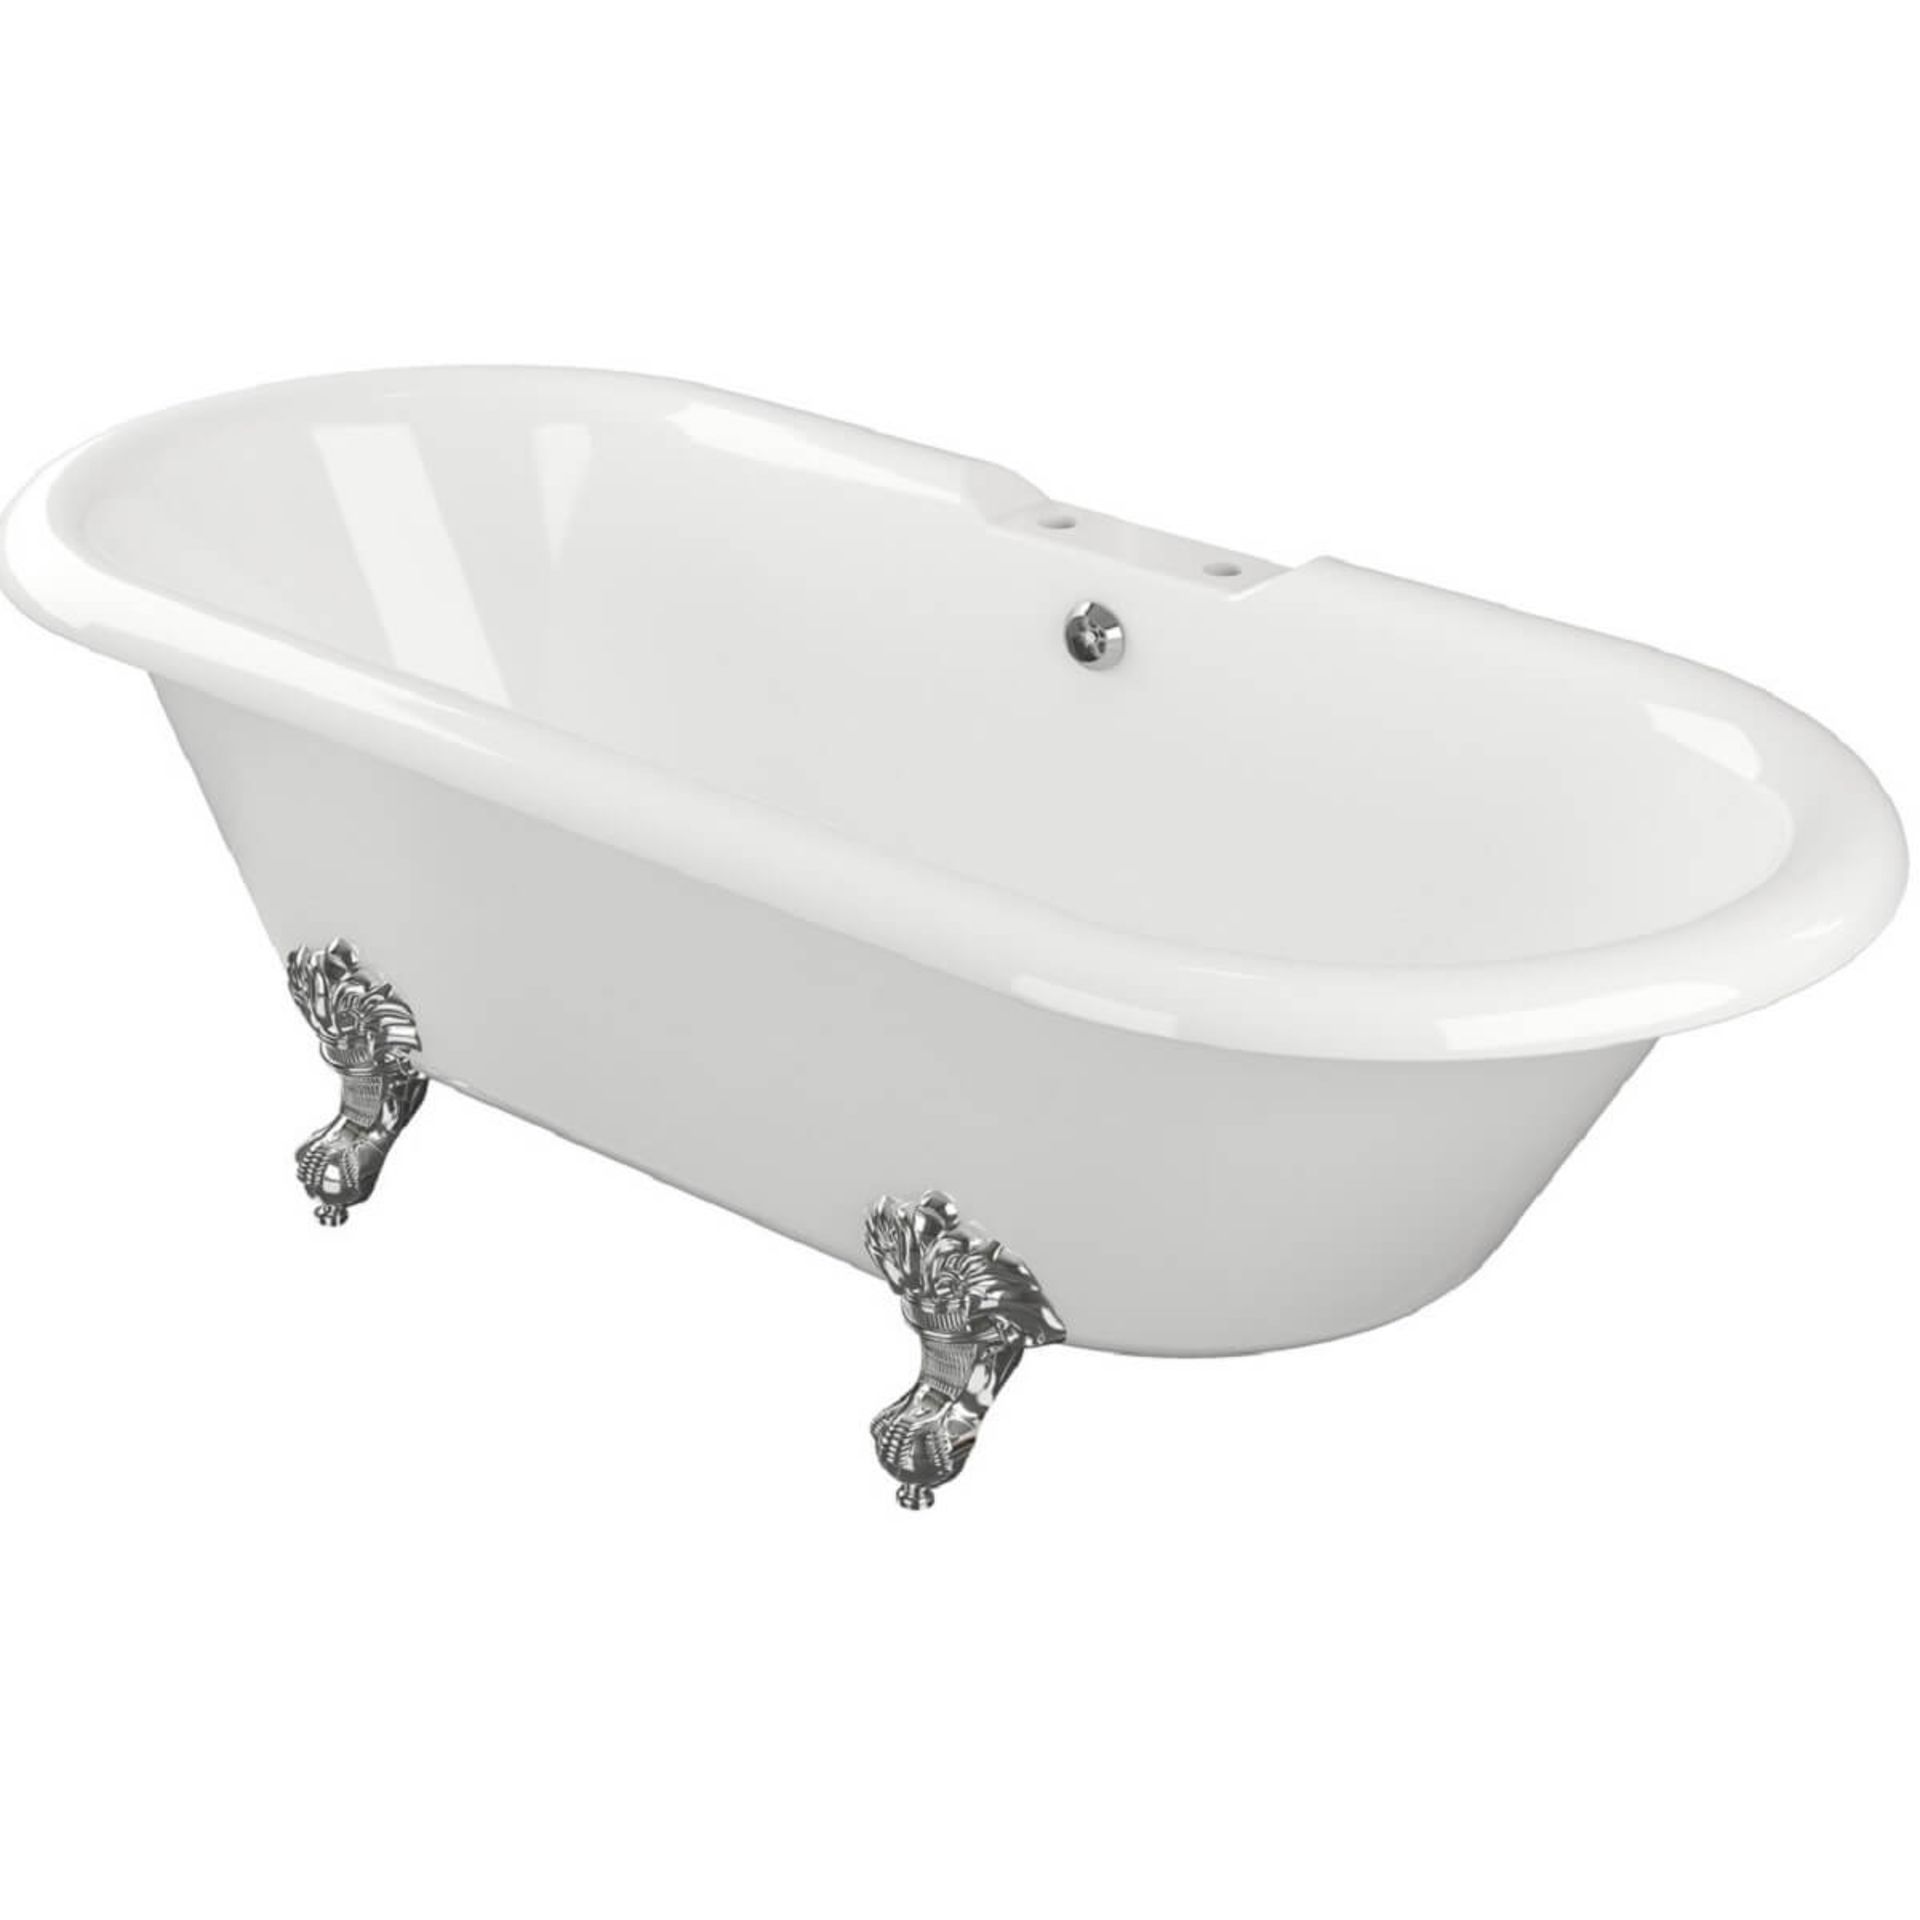 New (T5) 1690x740x620mm Richmond White Roller Top Freestanding Bath With Chrome Ball Feet. A ... - Image 2 of 2